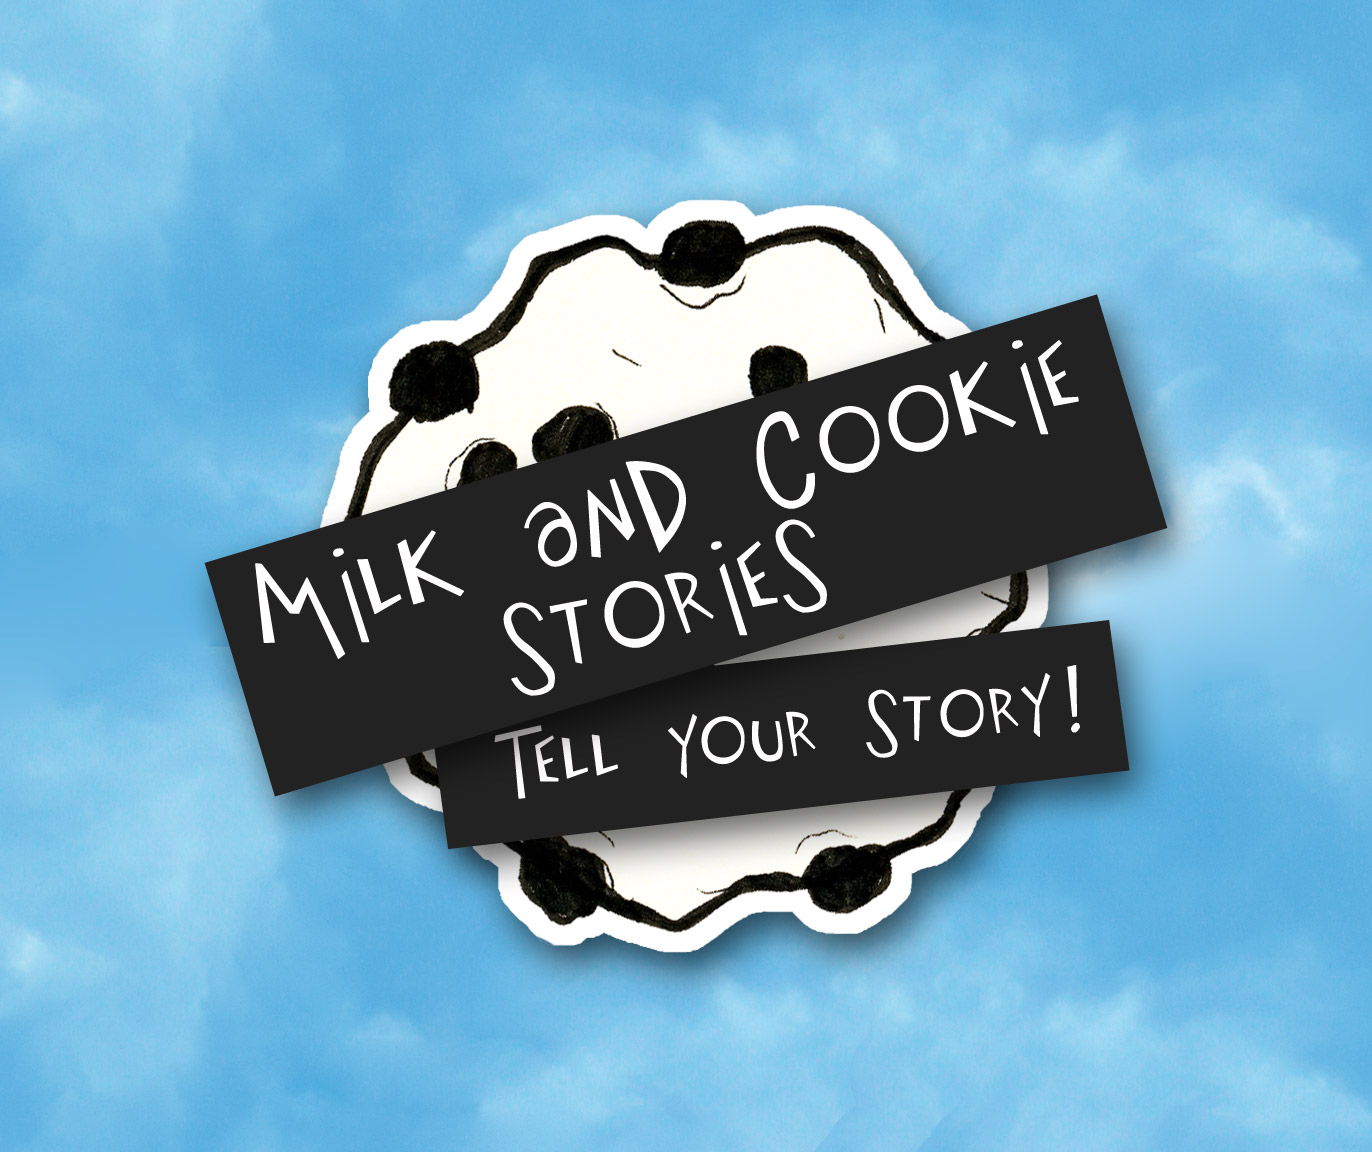 Milk and Cookie Stories poster